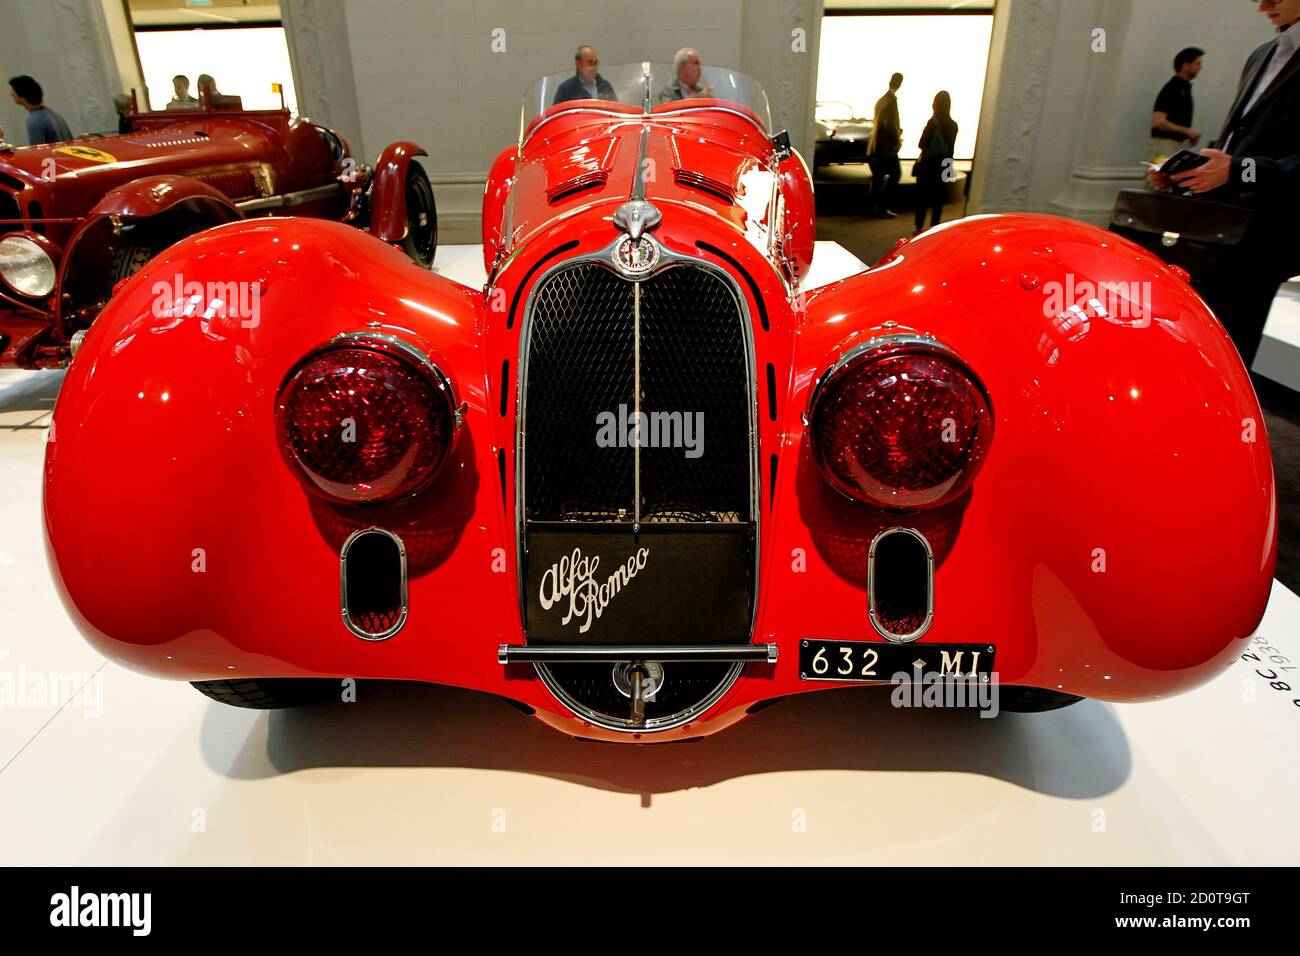 An Alfa Romeo 8C 2900 Mille Miglia 1938 vintage sport car is seen during  the press day of the exhibition 'The Art of the Automobile, Masterpieces  from the Ralph Lauren Collection' at